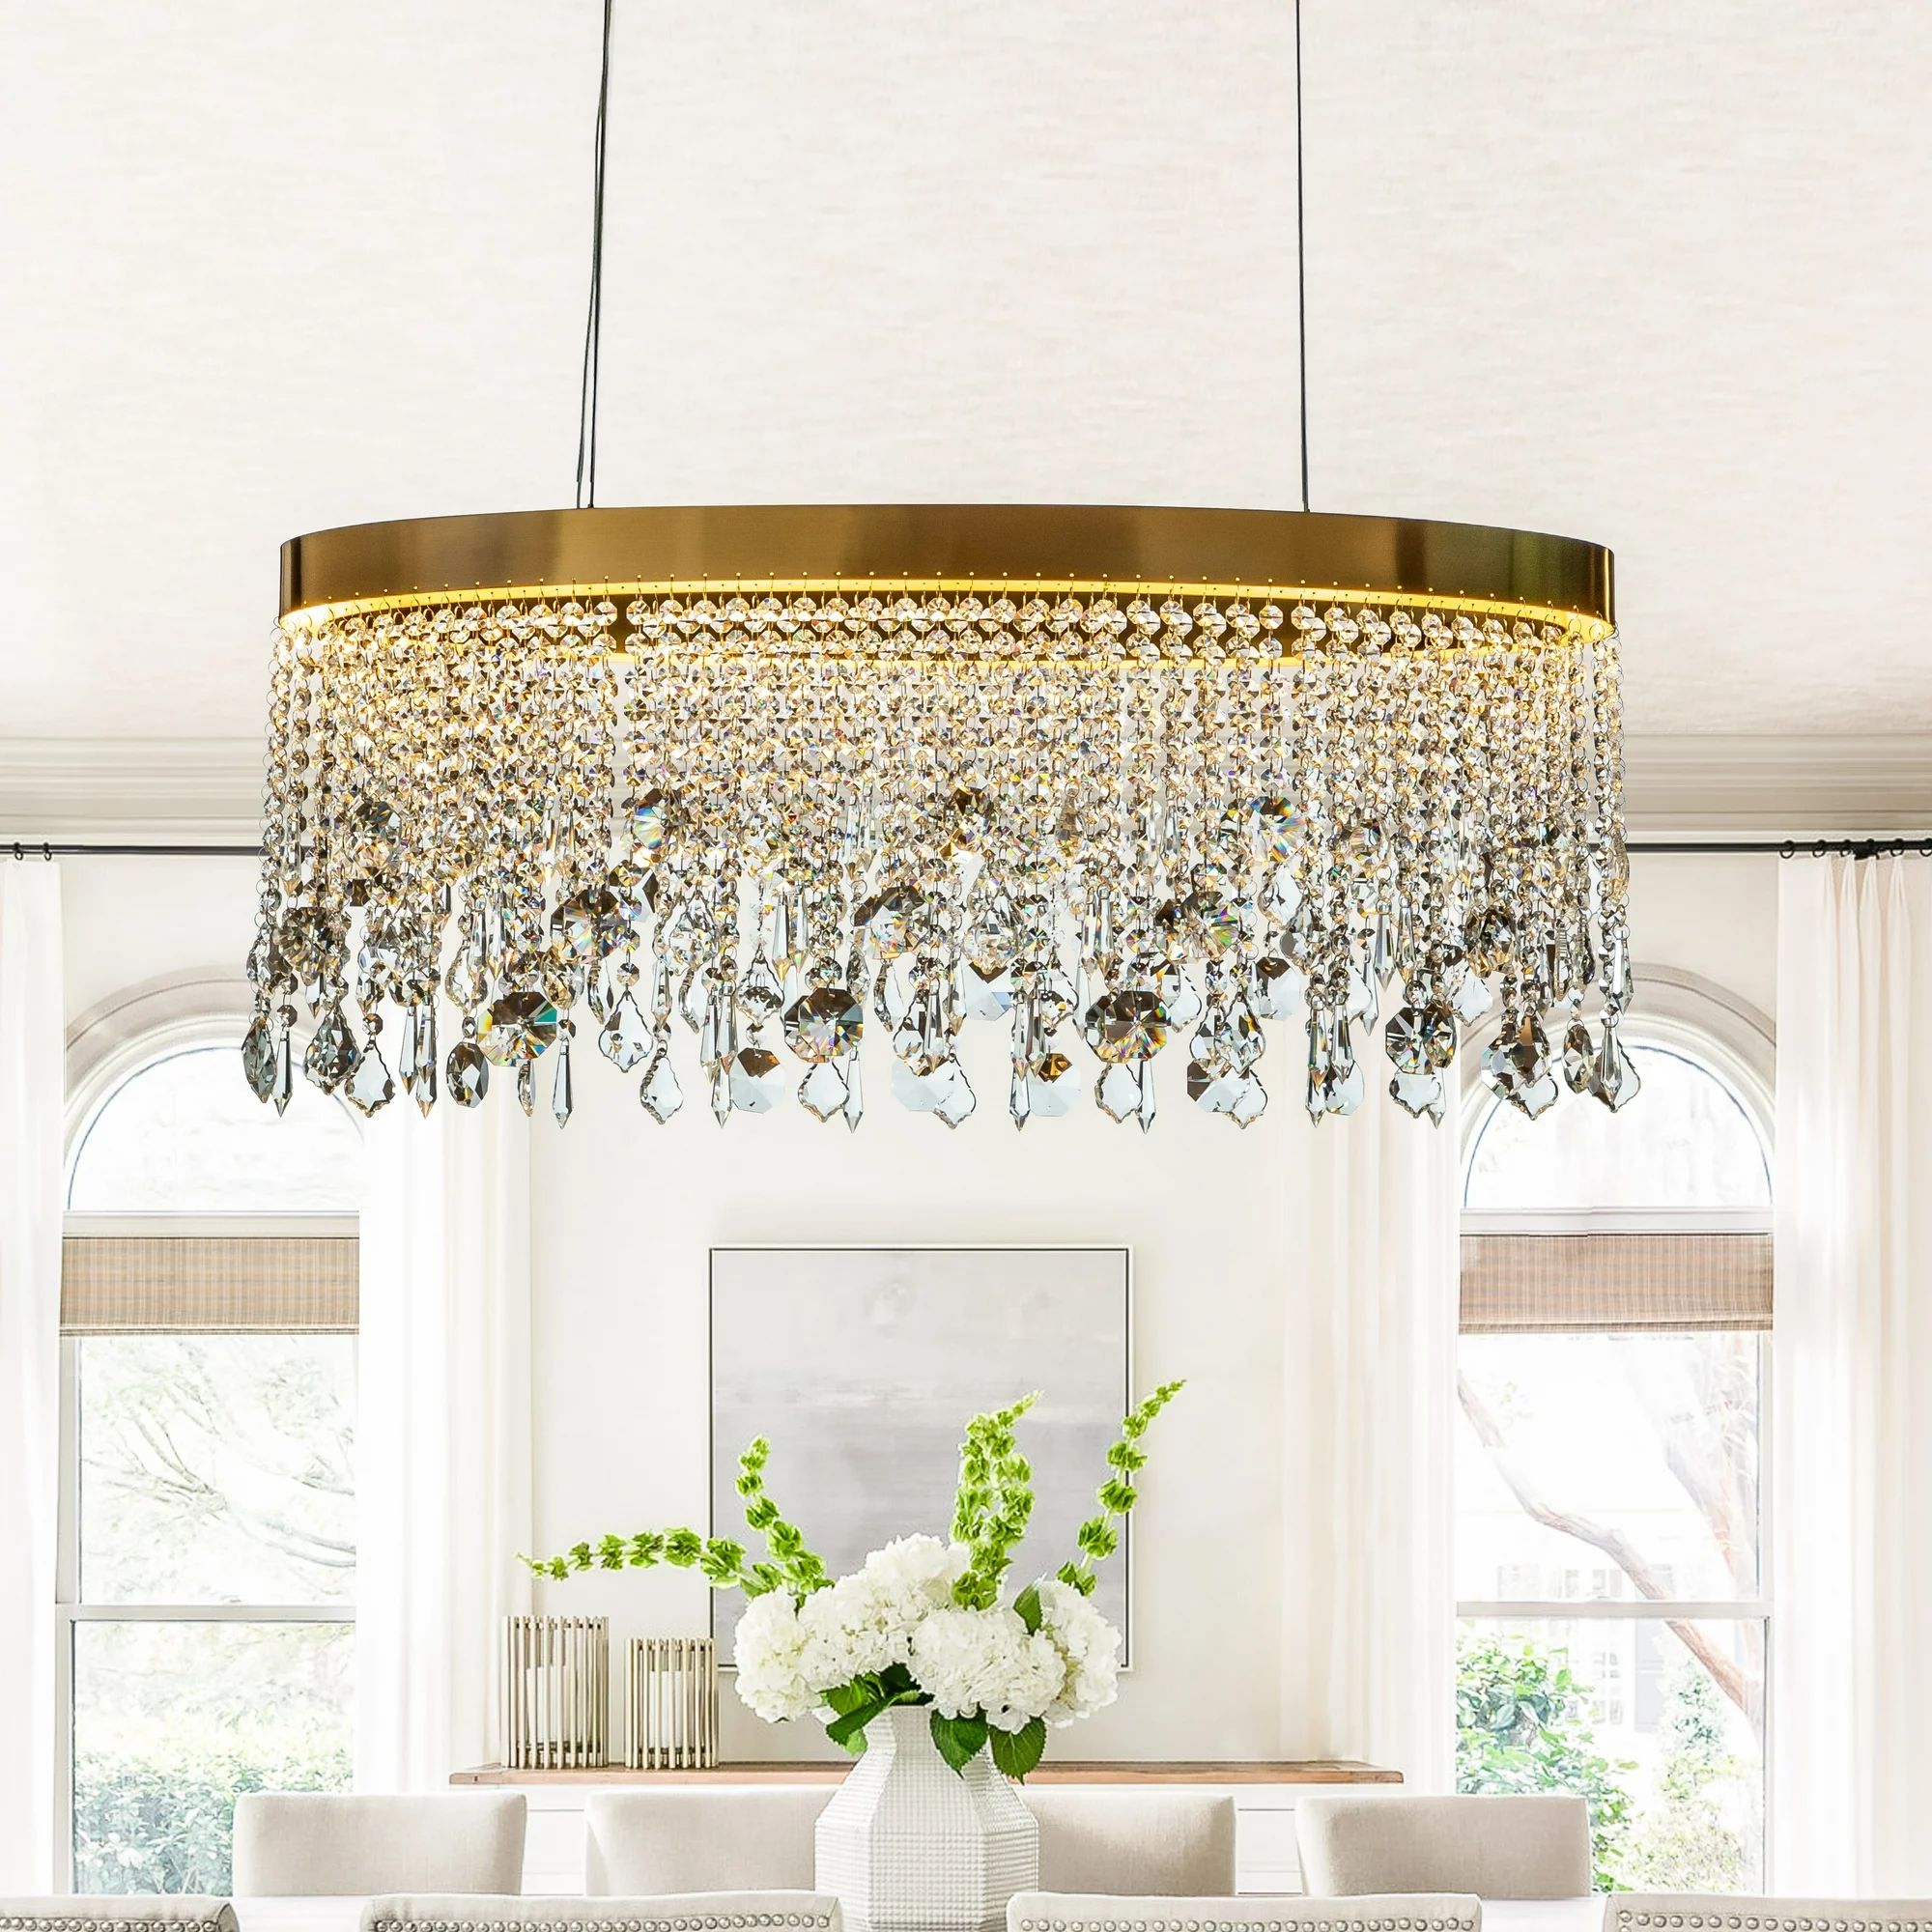 Modern Gold And Oval Led Linear Crystal Raindrop Chandelier For Kitchen Island And Dining Room | Walmart (US)